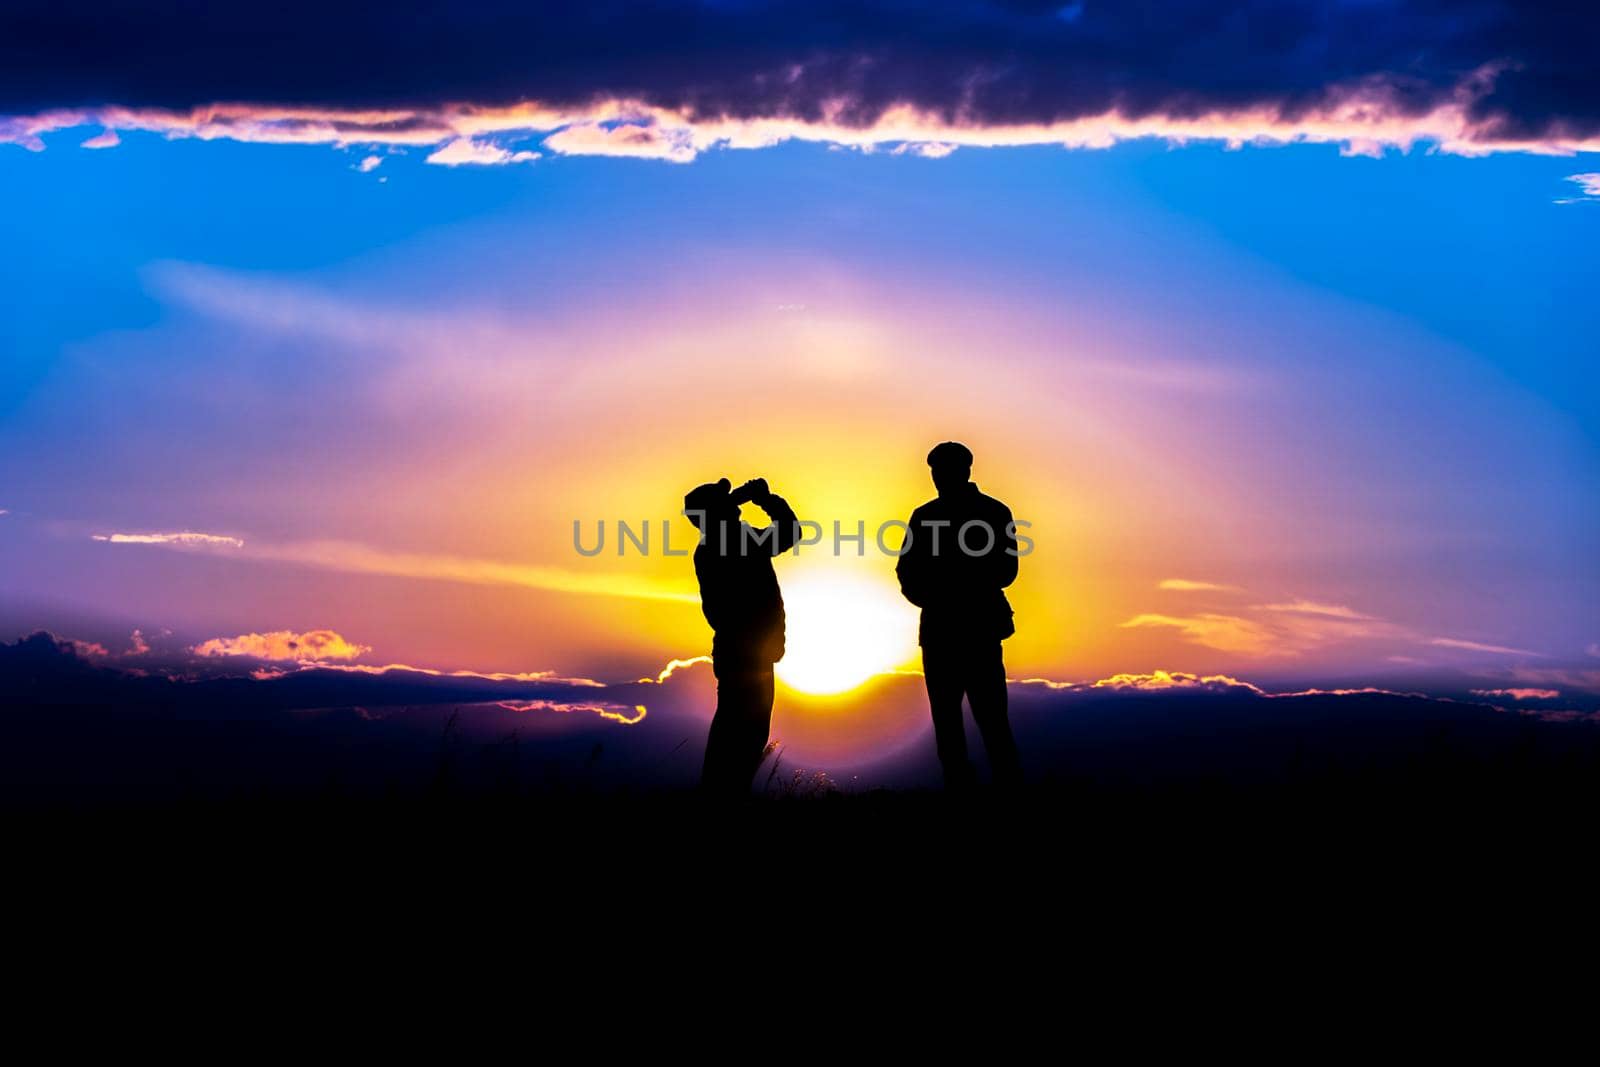 Two silhouettes of men talking and drinking a drink a jar at sunset or sunrise against an impressive sky and clouds.Outlines of people in the sunlight.Golden hour with friends on the horizon skyline by YevgeniySam